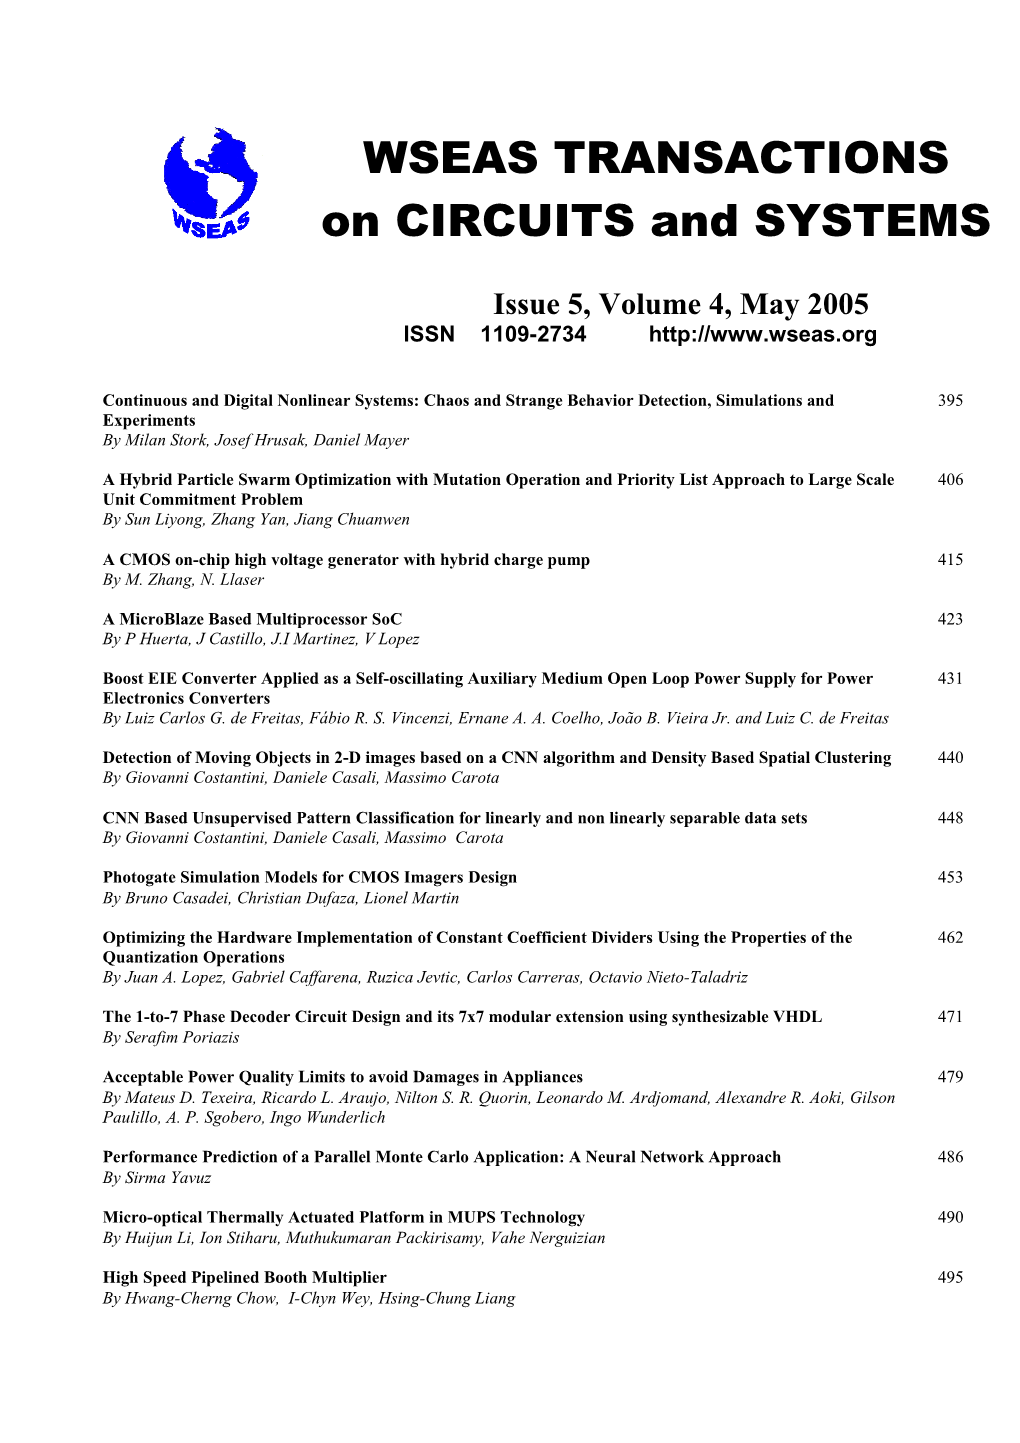 WSEAS Trans. on CIRCUITS and SYSTEMS, May 2005